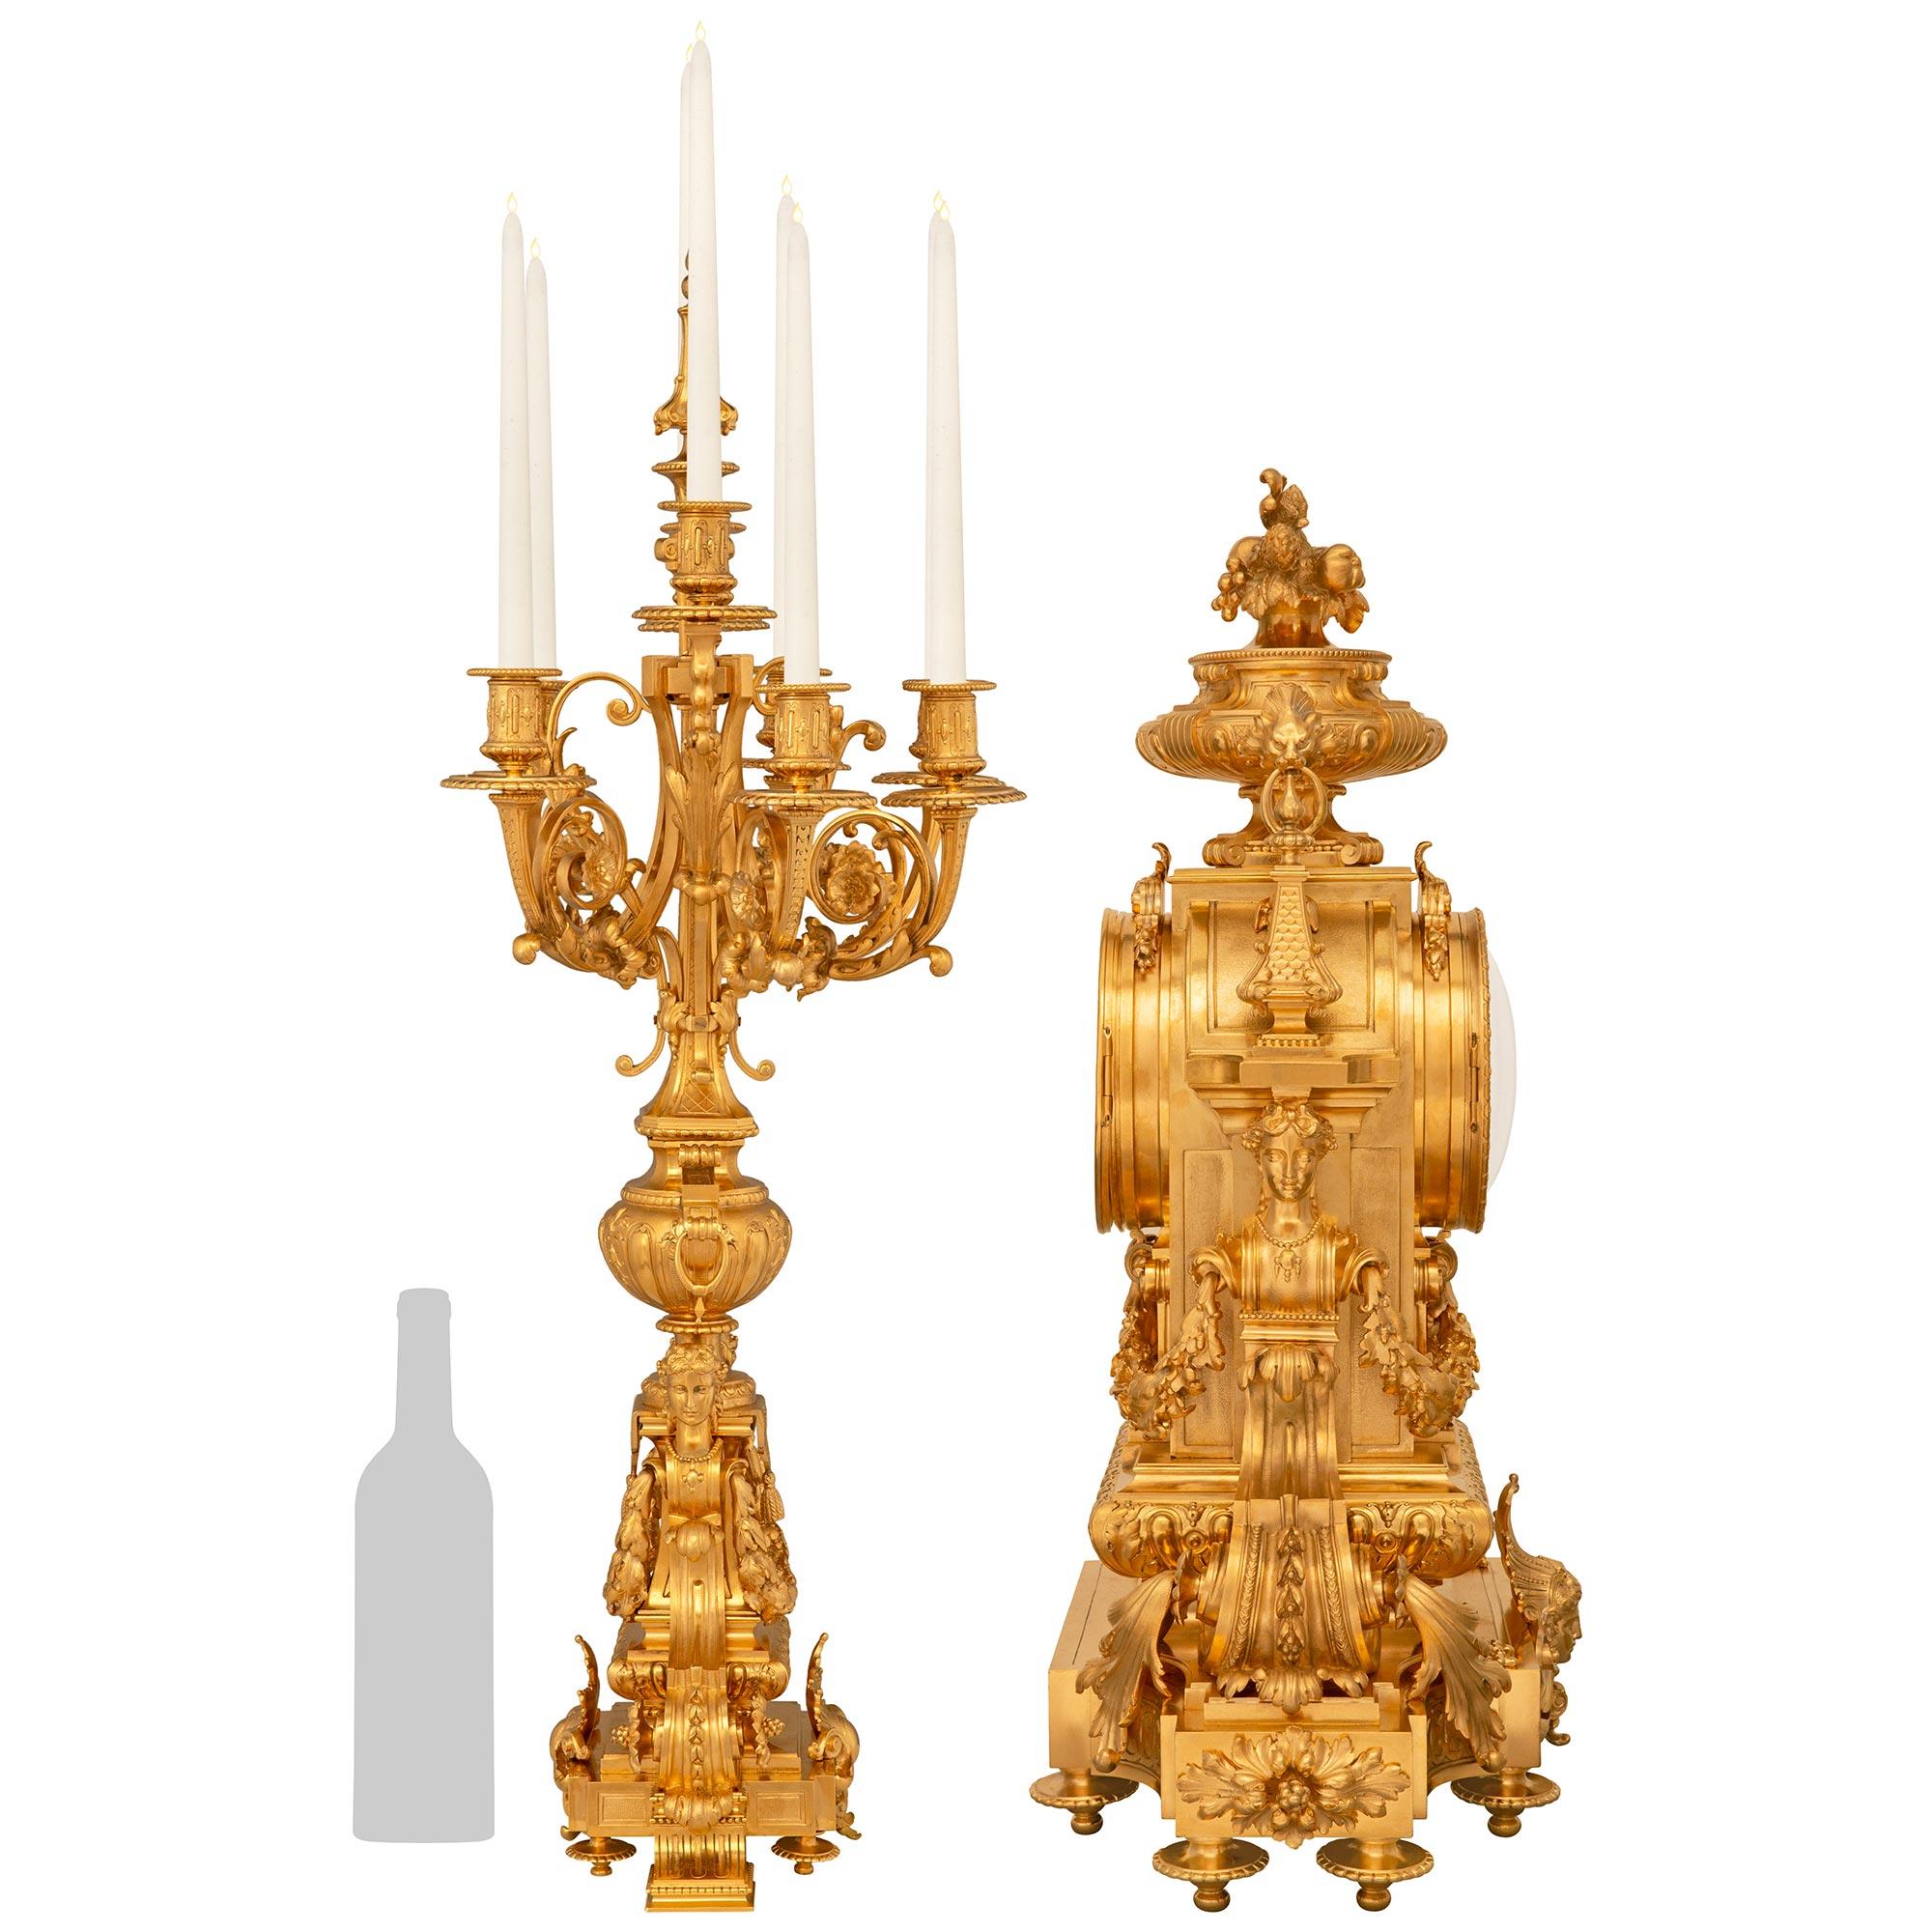 An extremely detailed and high quality French 19th century Regence st. Ormolu three piece garniture set, signed by the Lemerle-Charpentier foundry. This monumental garniture set consists of two candelabras and one clock. The clock is raised on a